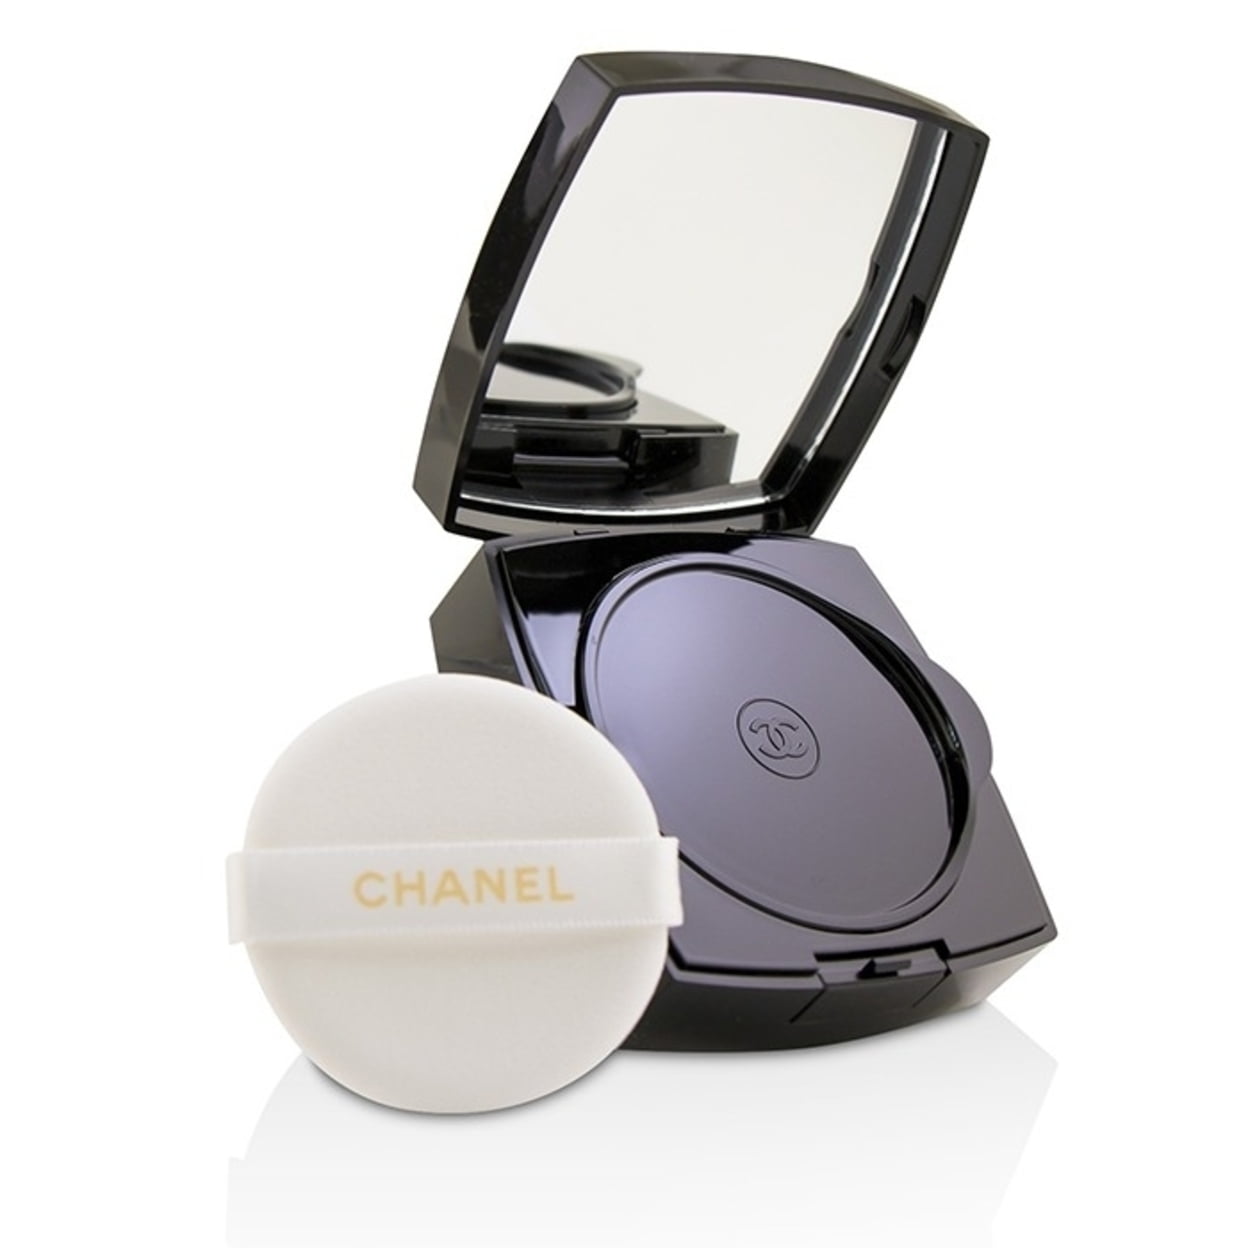 Chanel Les Beiges Water-Fresh Complexion Touch - B20